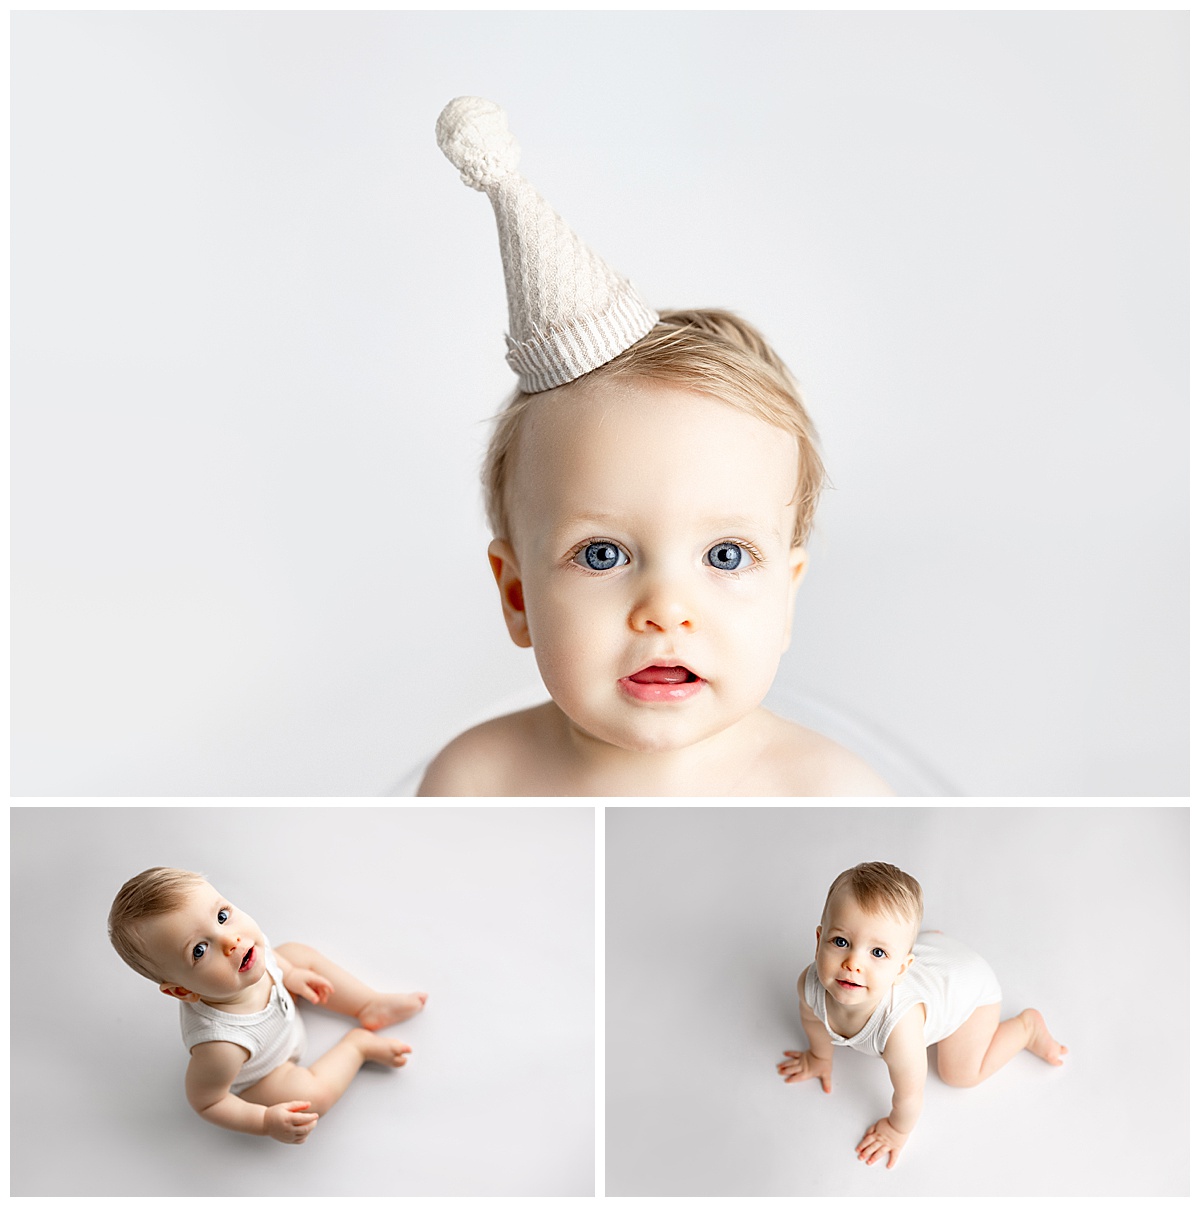 Baby wears cute birthday hat and crawls on the floor during their First Birthday Cake Smash